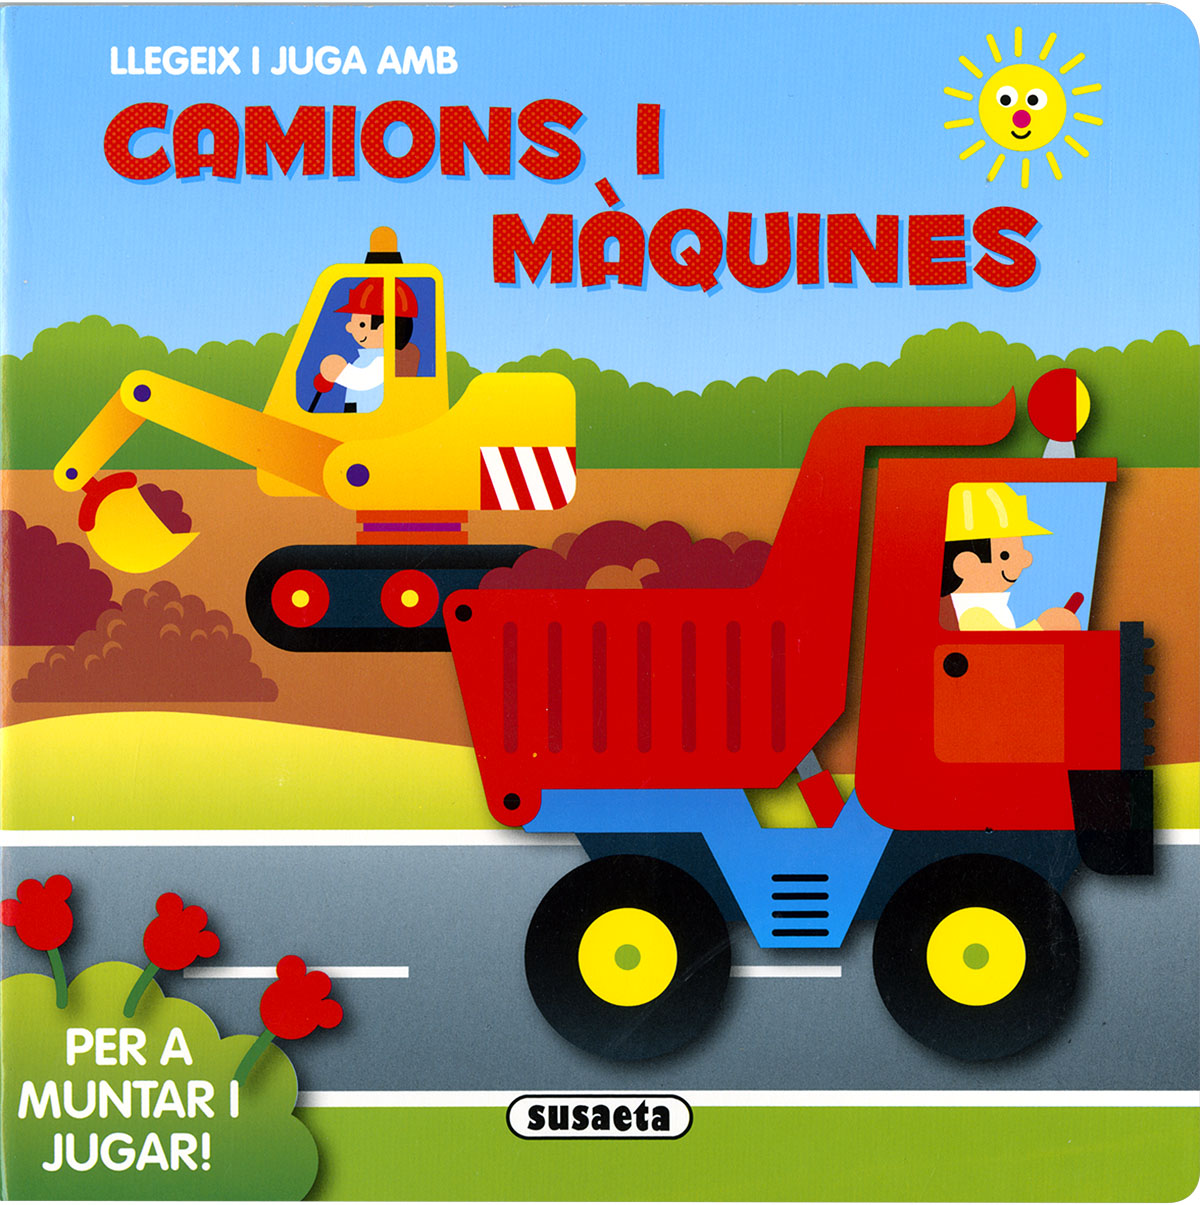 Camions i mquines